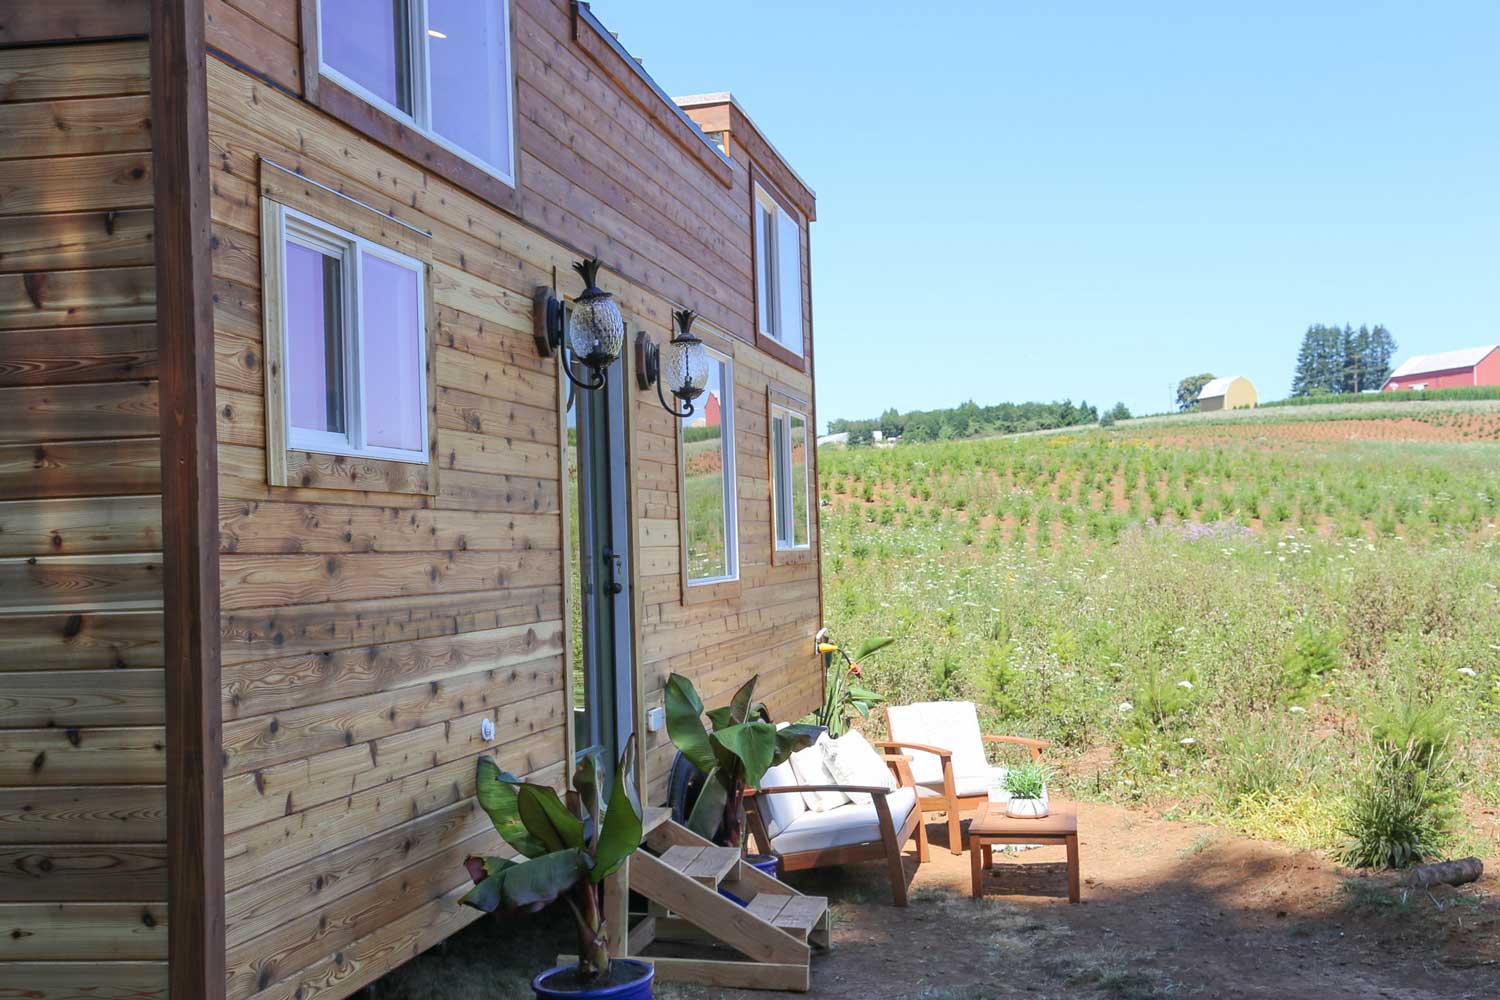 Outside of the Tropical Getaway custom tiny house with patio furniture, and a vineyard in the background